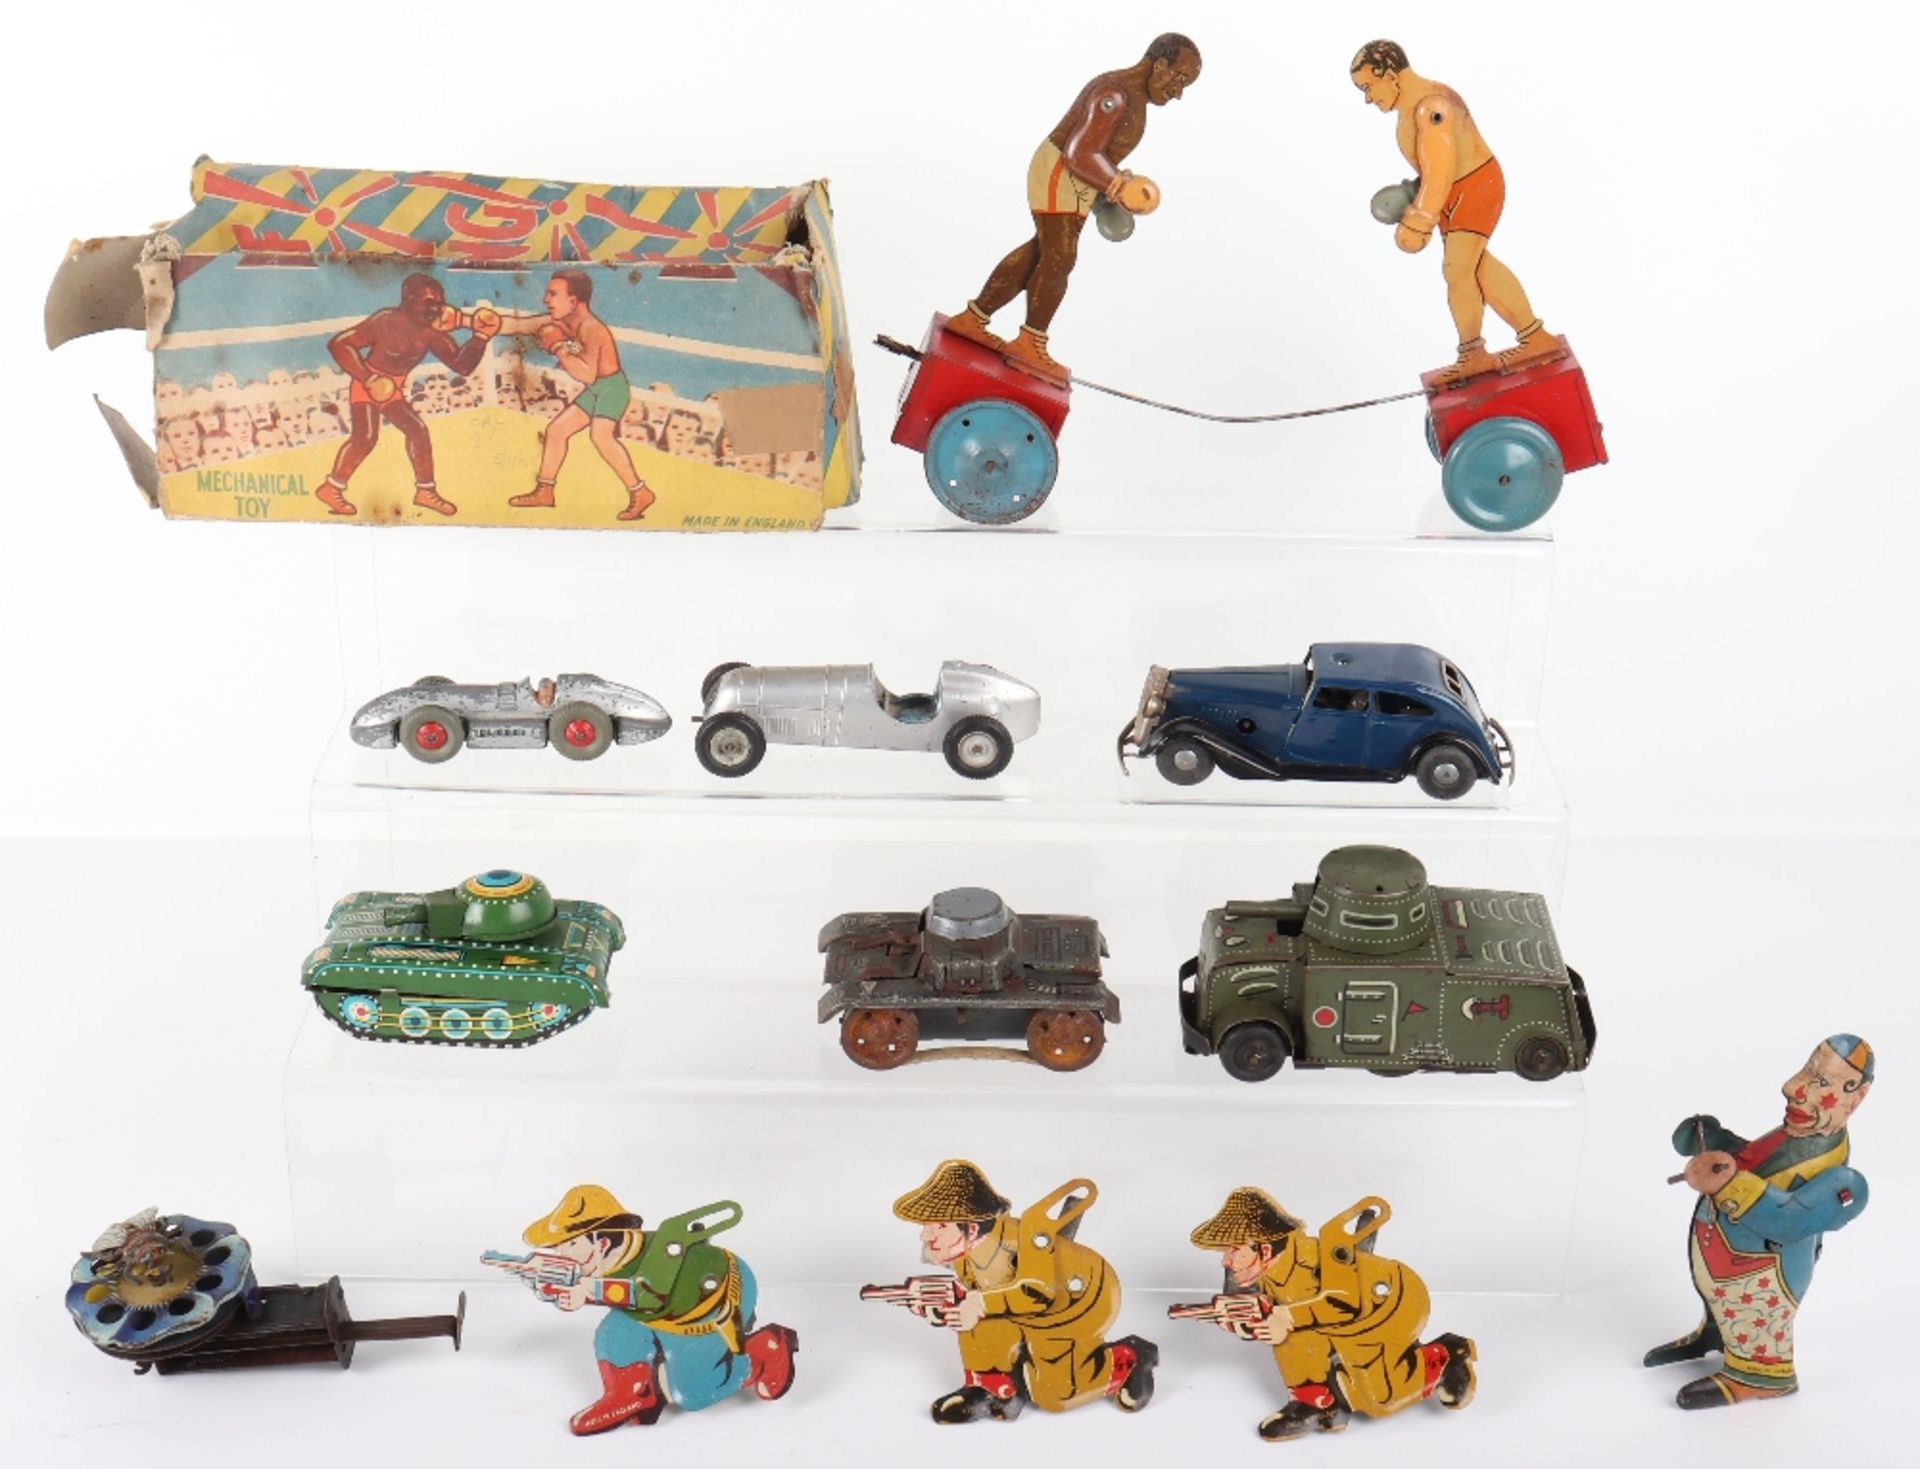 British tinplate boxing toy and other novelty toys